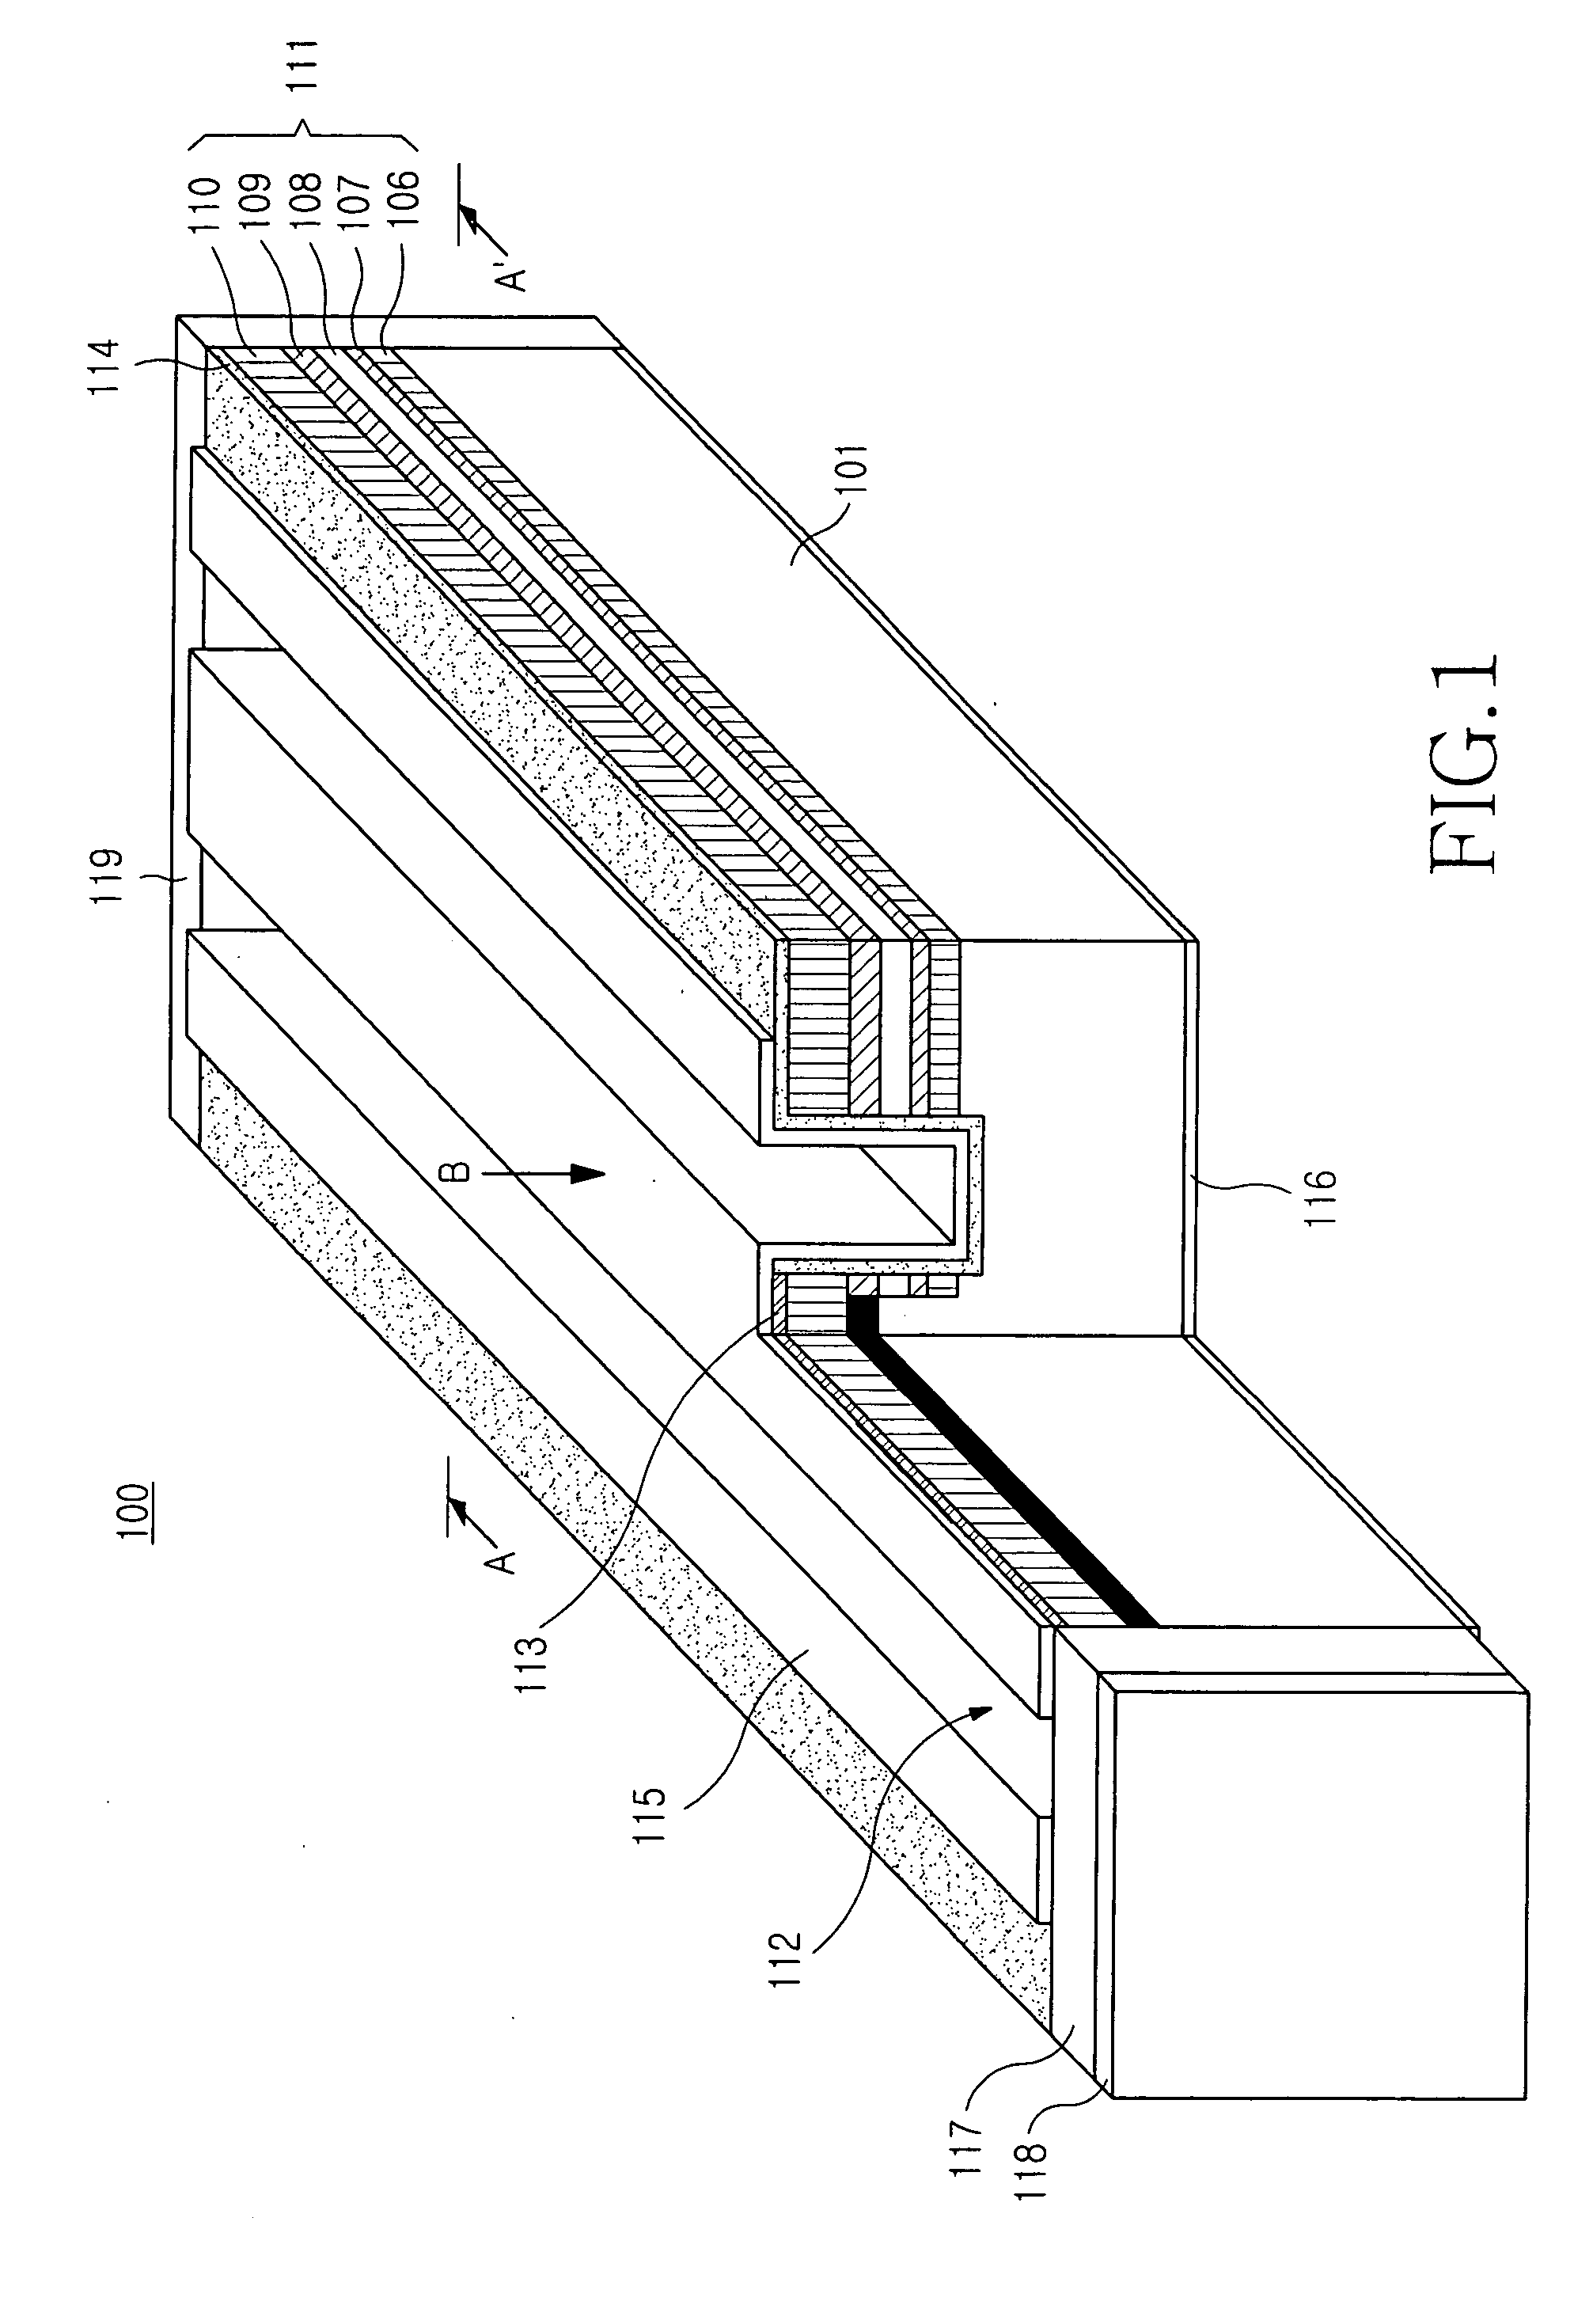 Reflective semiconductor optical amplifier